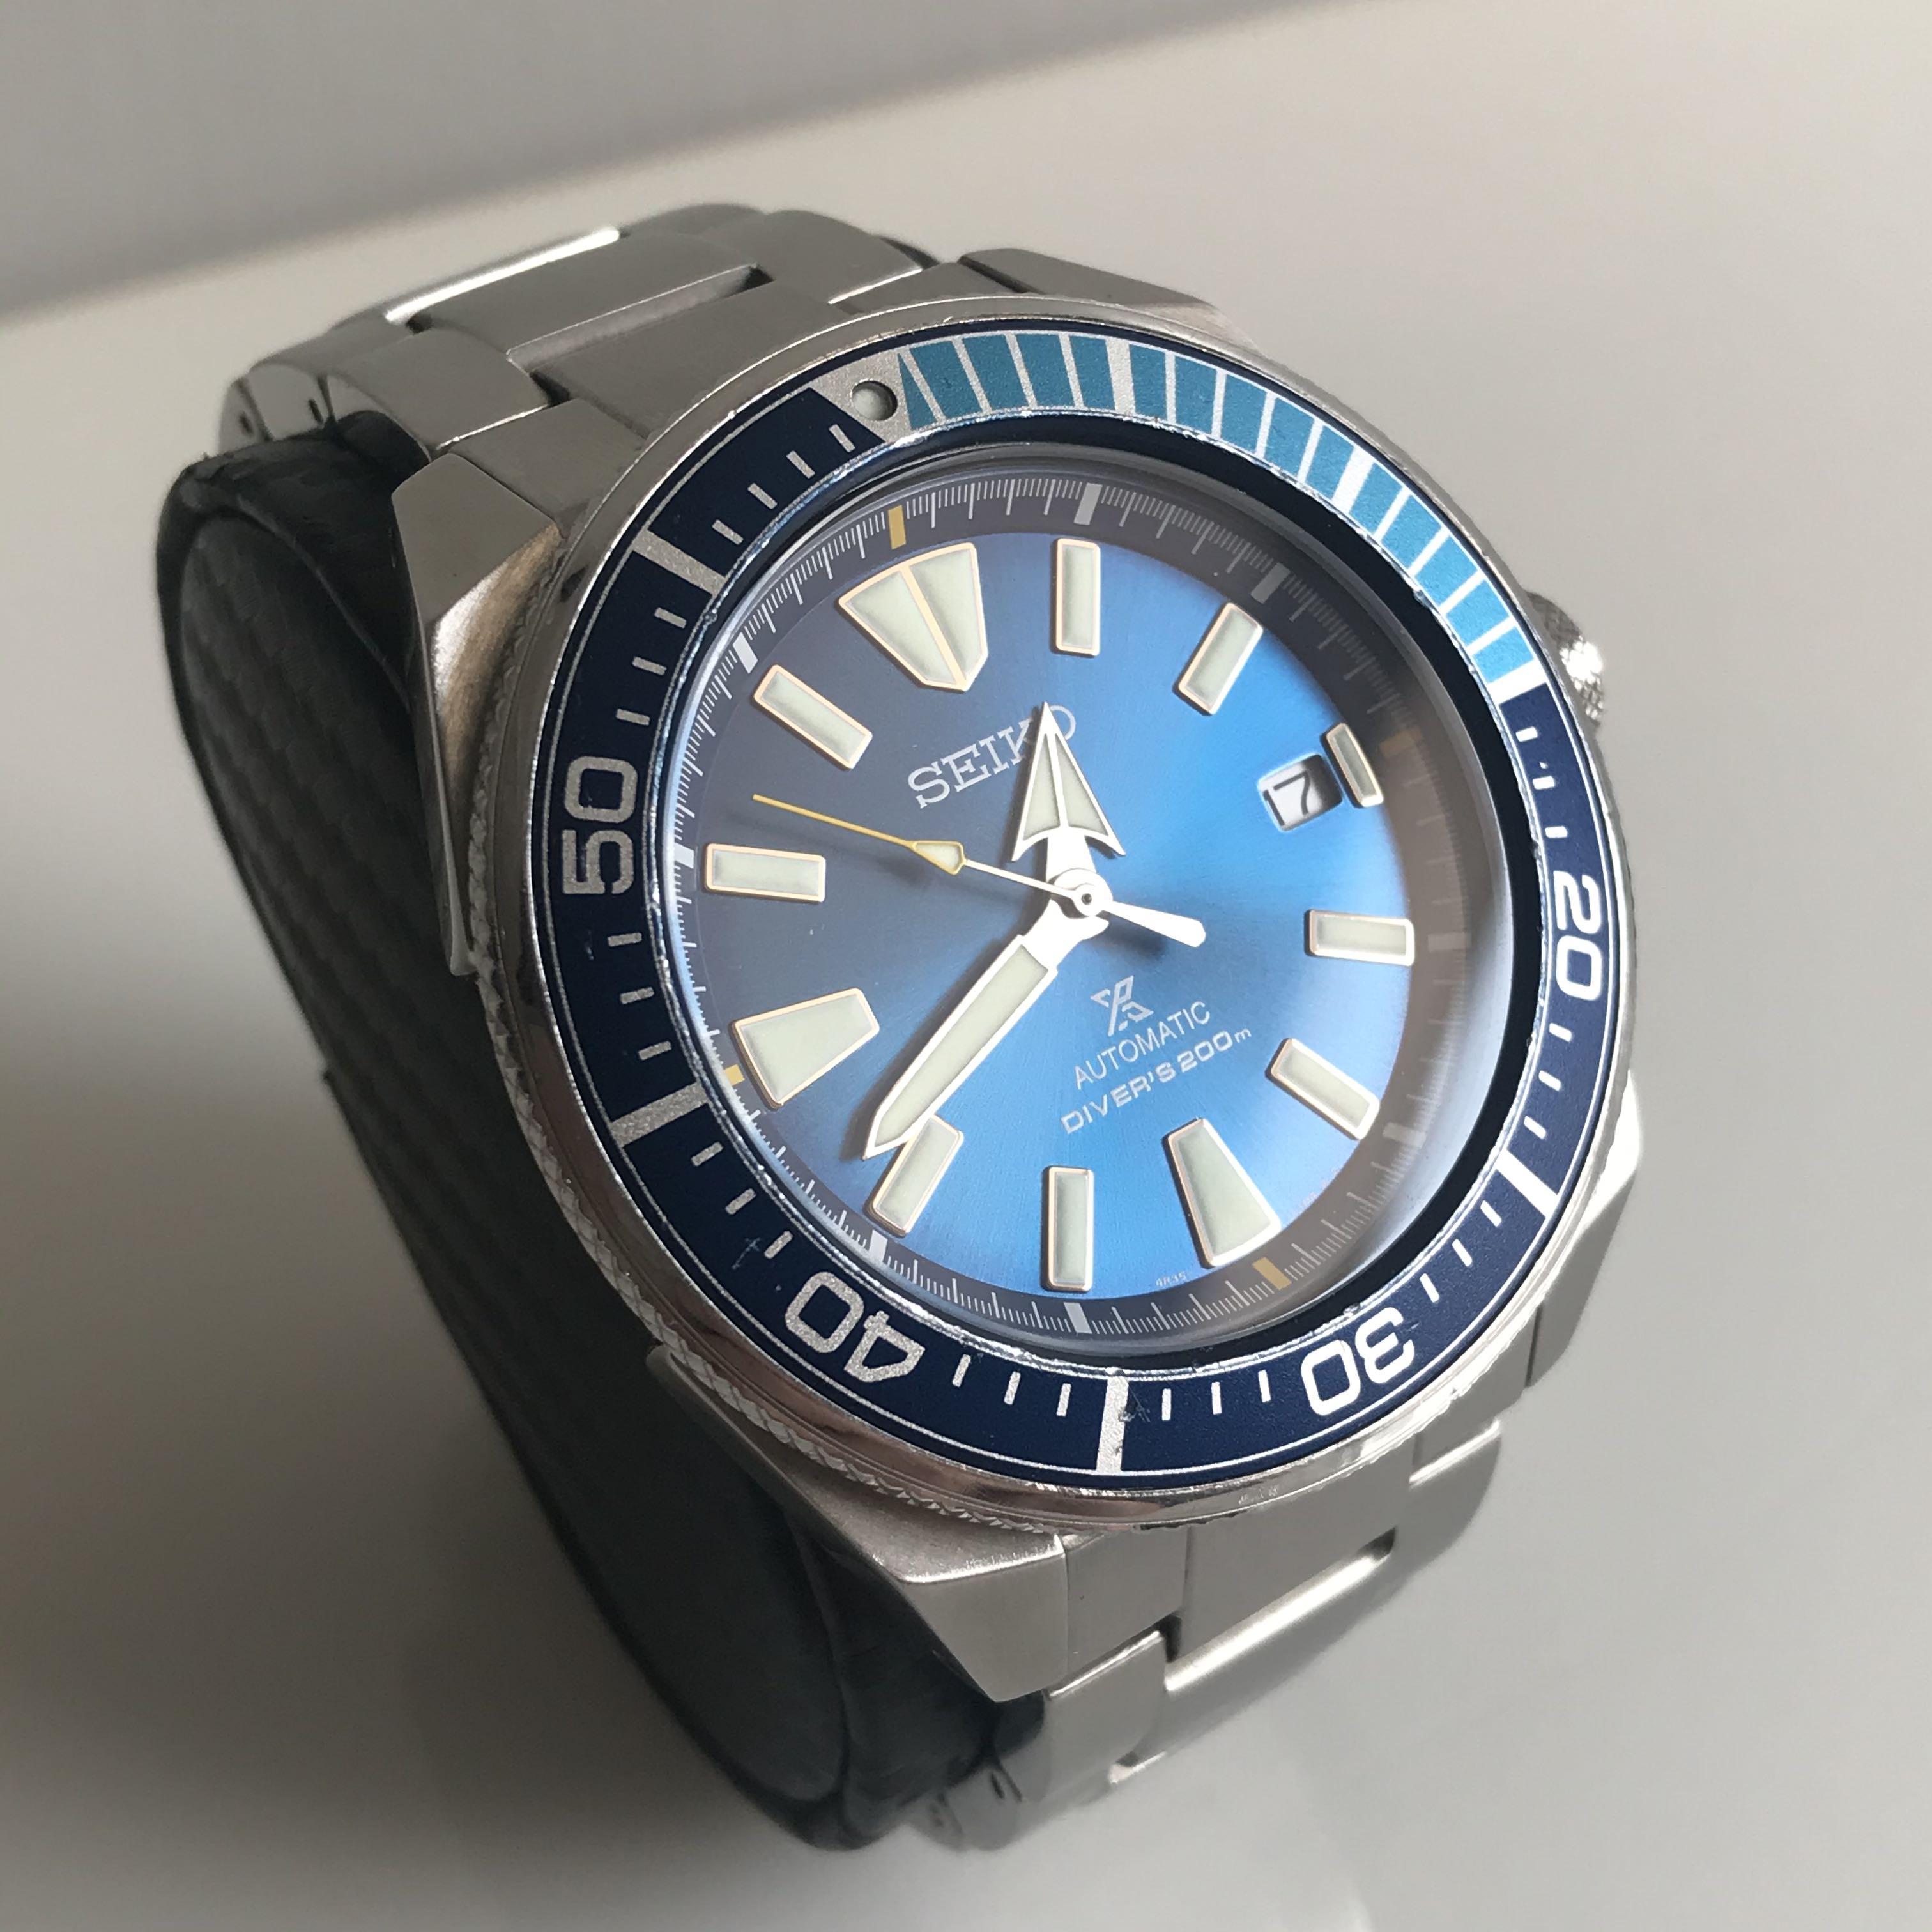 SOLD] Limited Edt Seiko Samurai Blue Lagoon SRPB09K1, Men's Fashion,  Watches & Accessories, Watches on Carousell